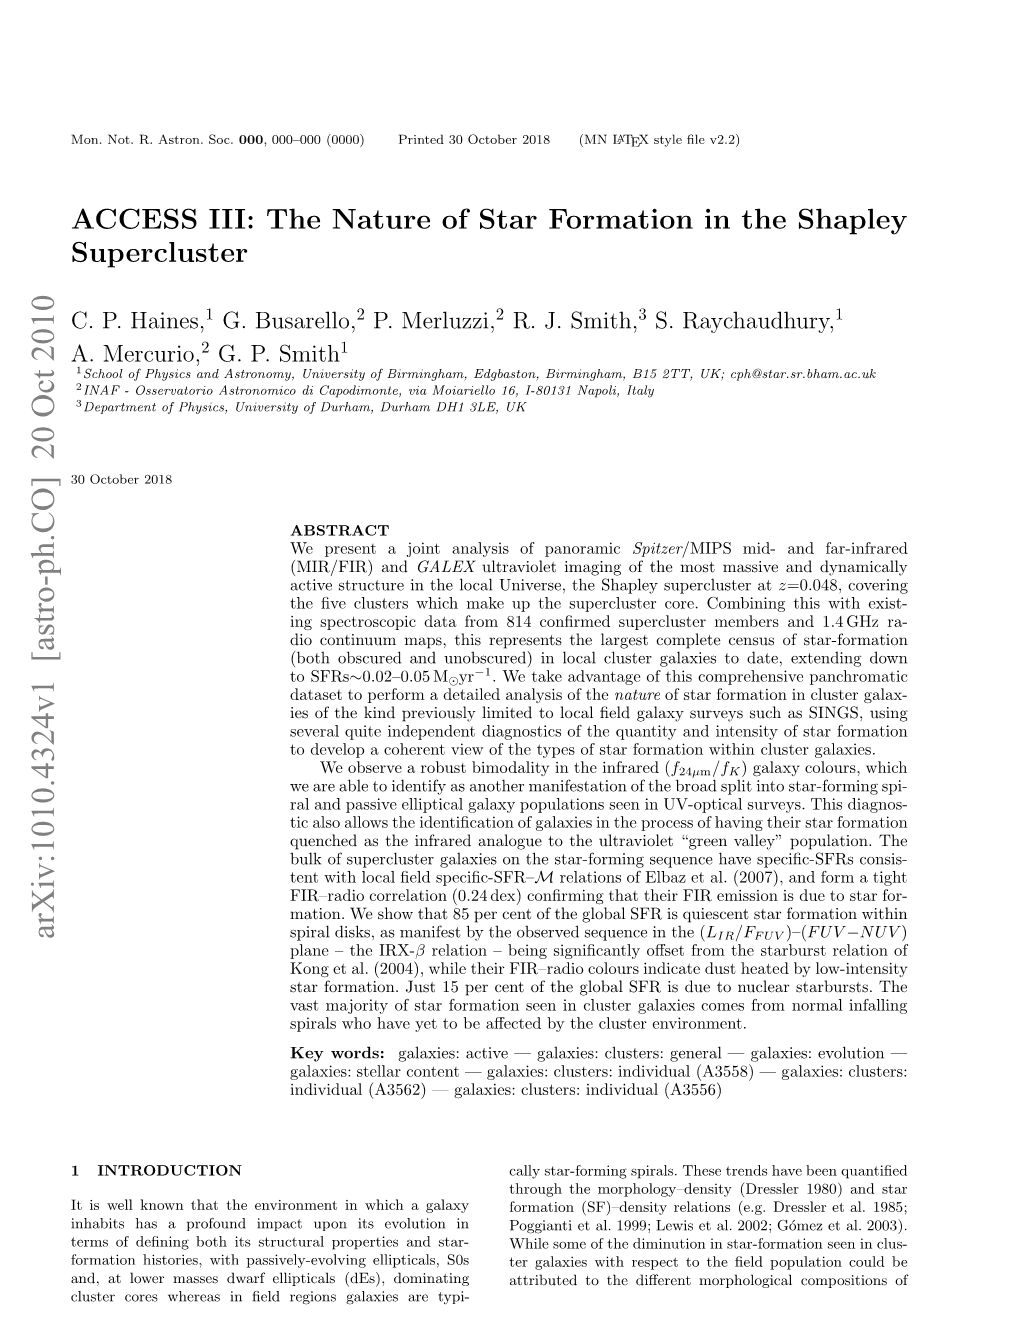 ACCESS III: the Nature of Star Formation in the Shapley